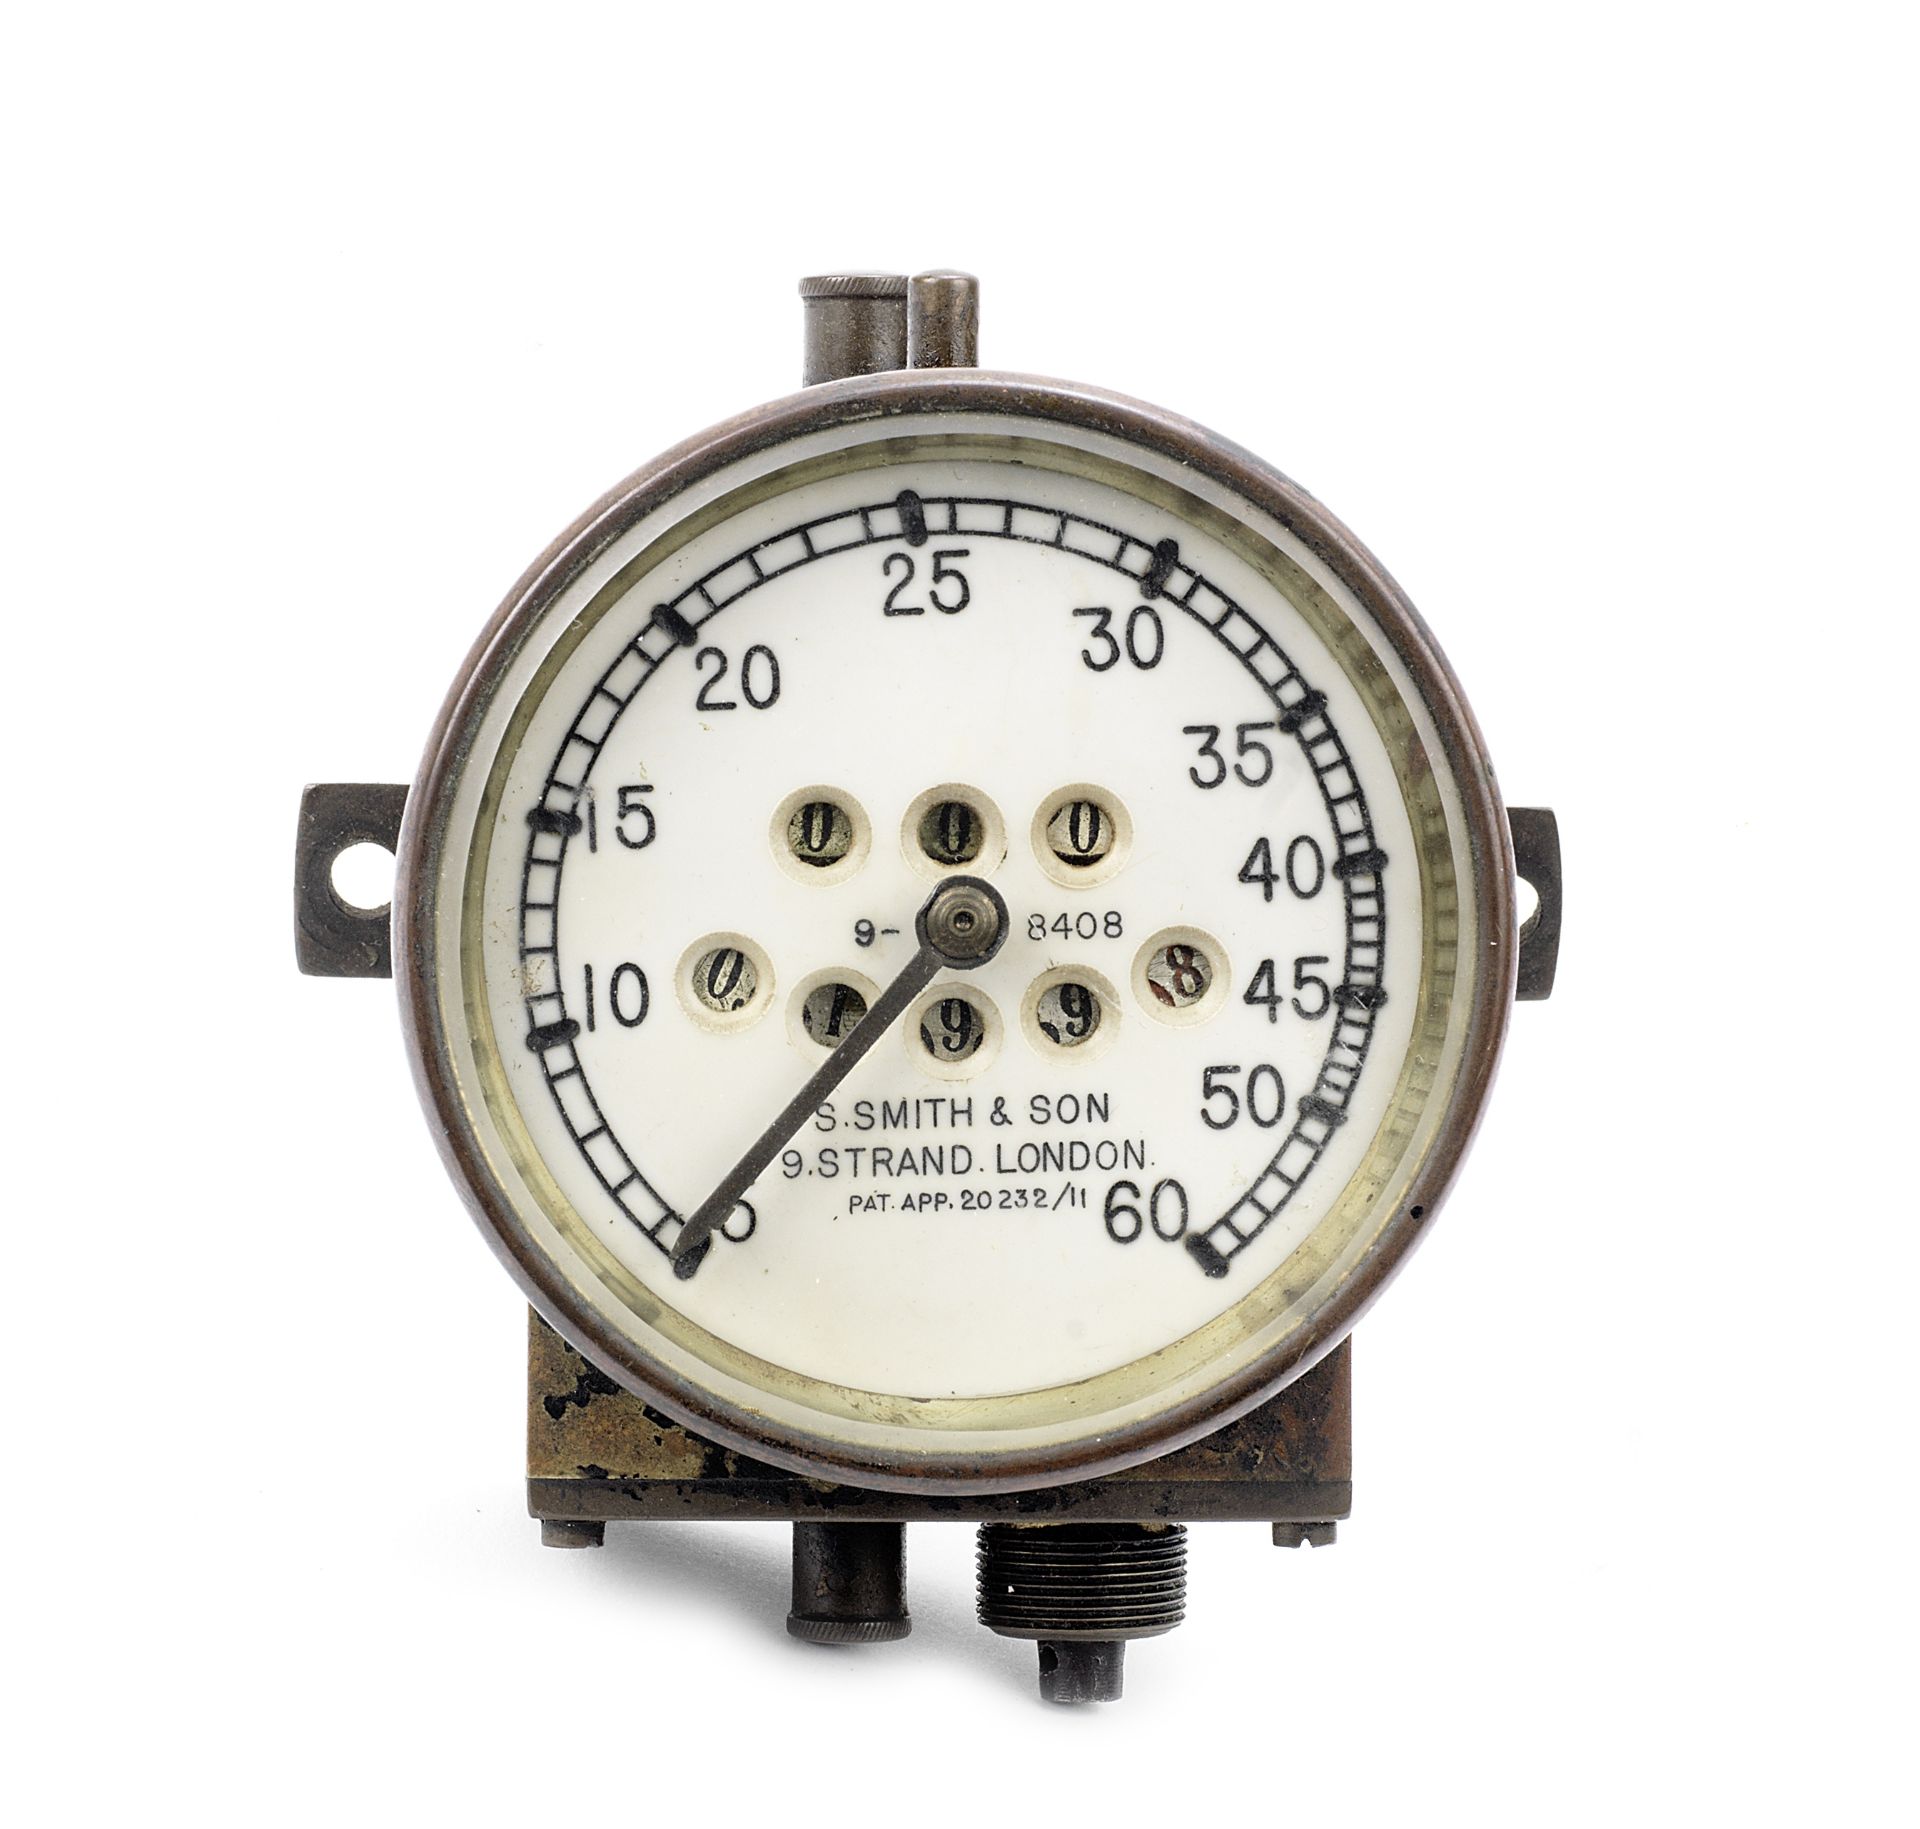 A Speedometer by S.Smith & Son, British, patented 1911,